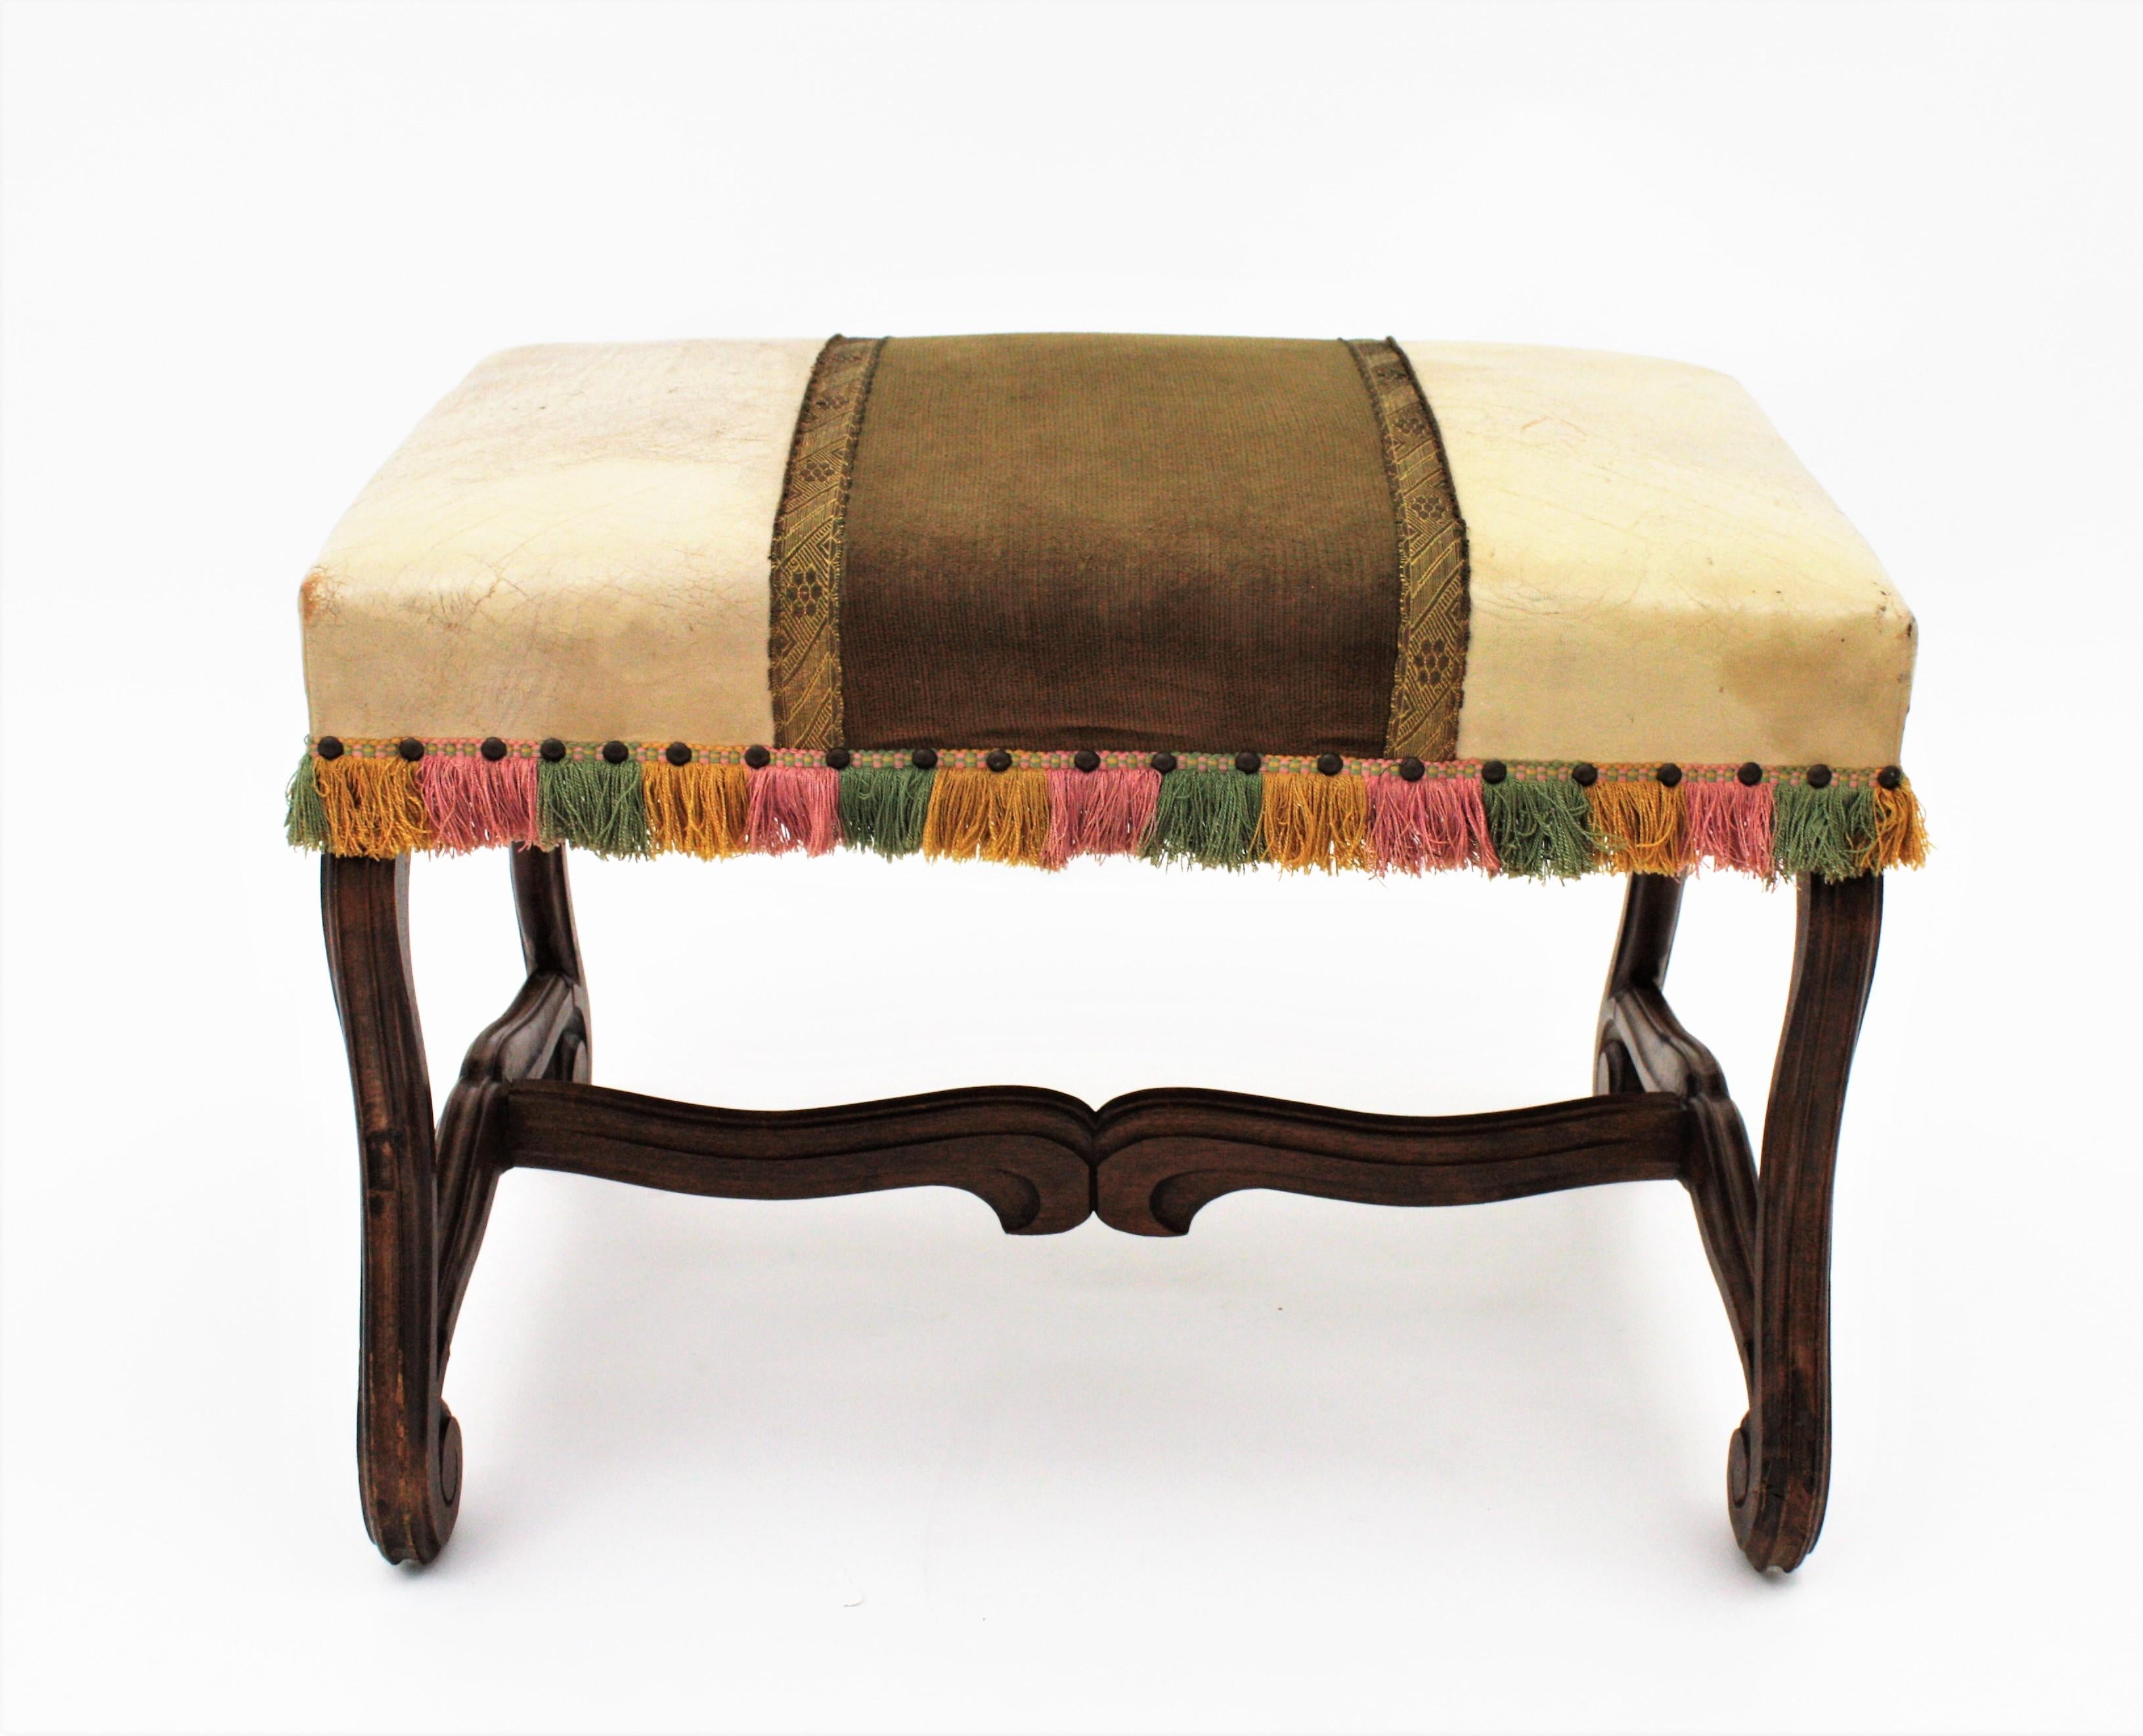 Hand-Carved Os de Mouton Louis XIV Style Walnut Stool or Bench For Sale